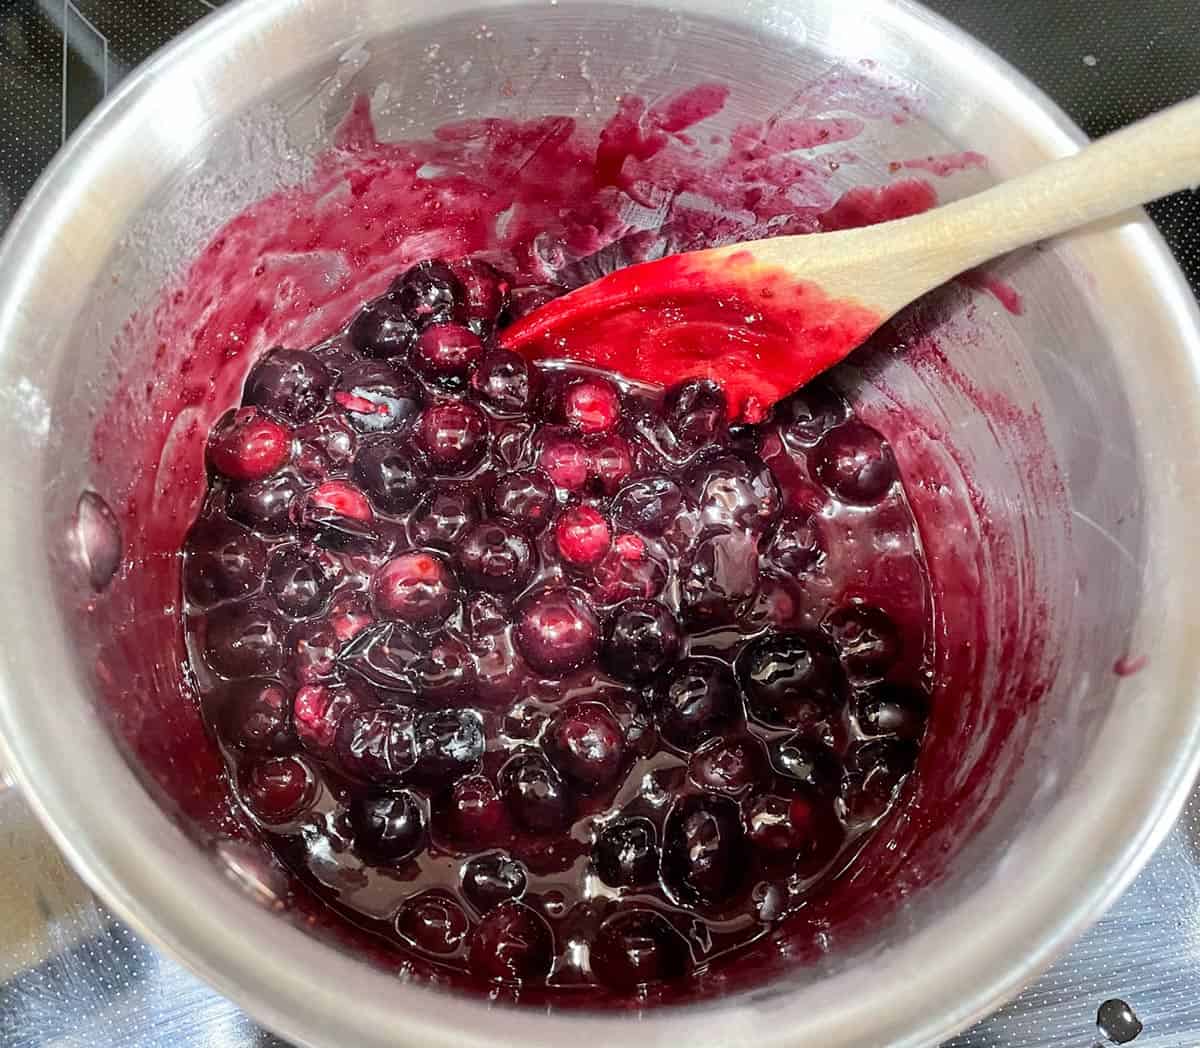 Cooking the blueberry topping.